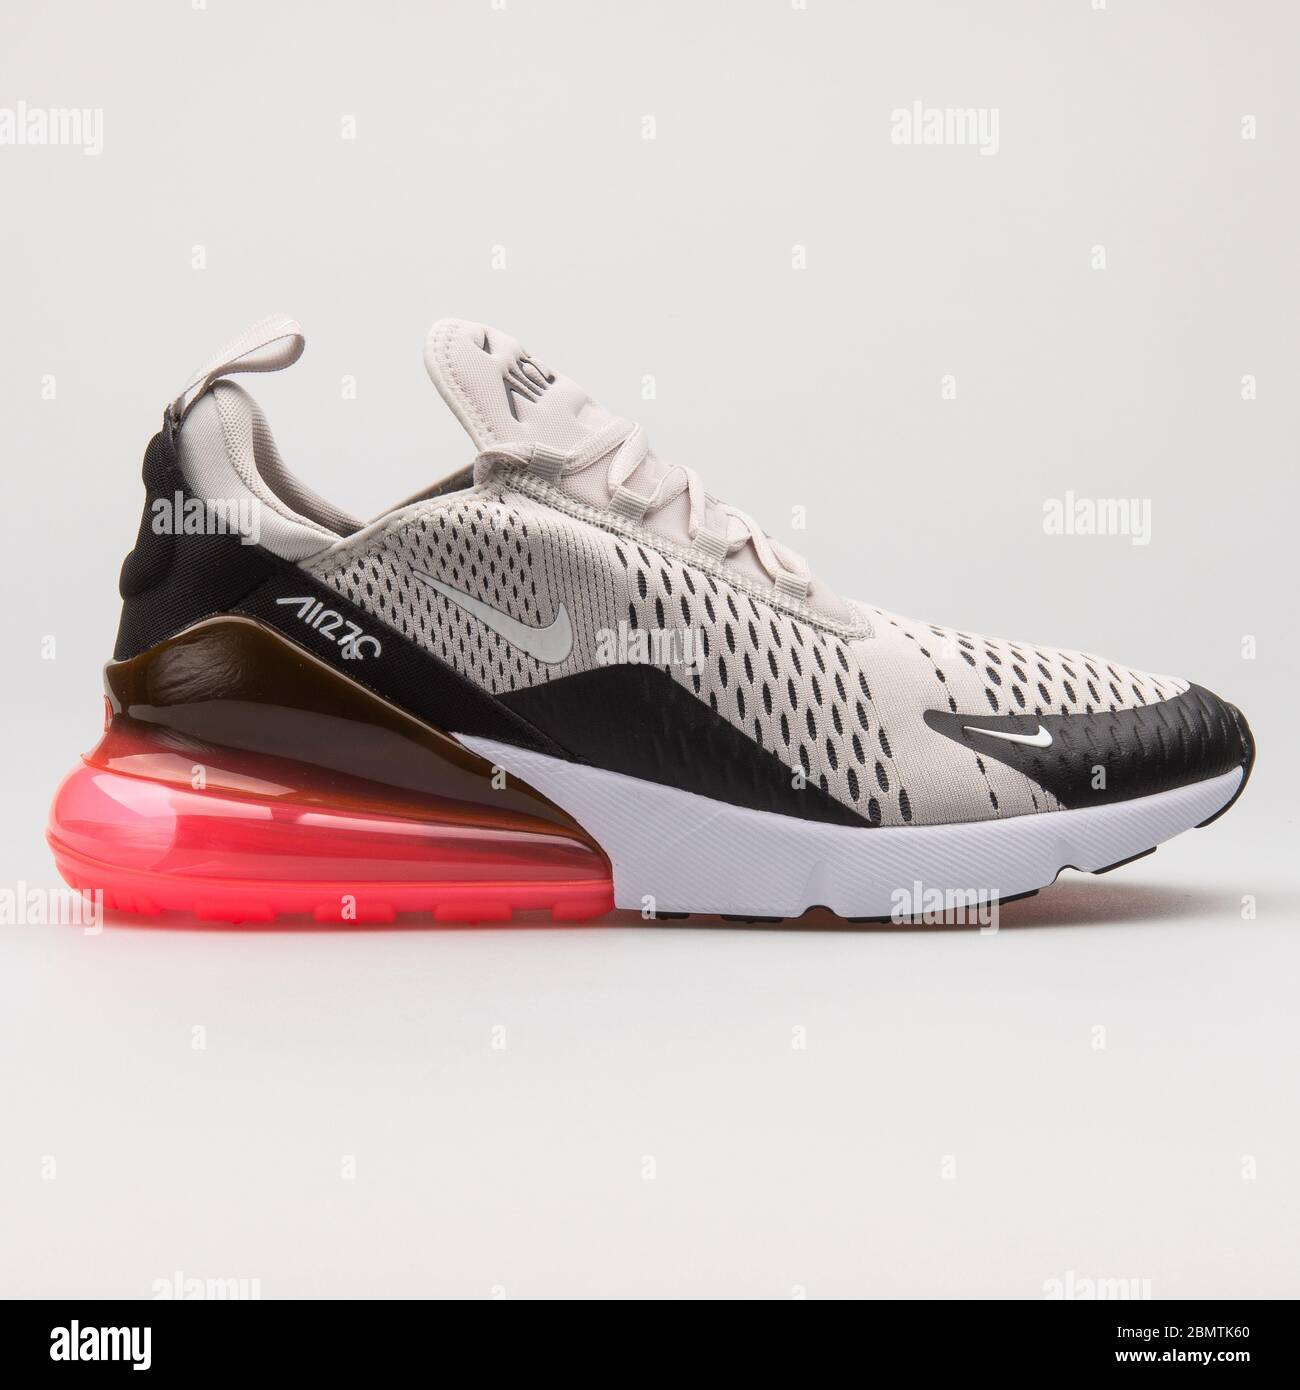 VIENNA, AUSTRIA - FEBRUARY 19, 2018: Nike Air Max 270 beige, black and red  sneaker on white background Stock Photo - Alamy